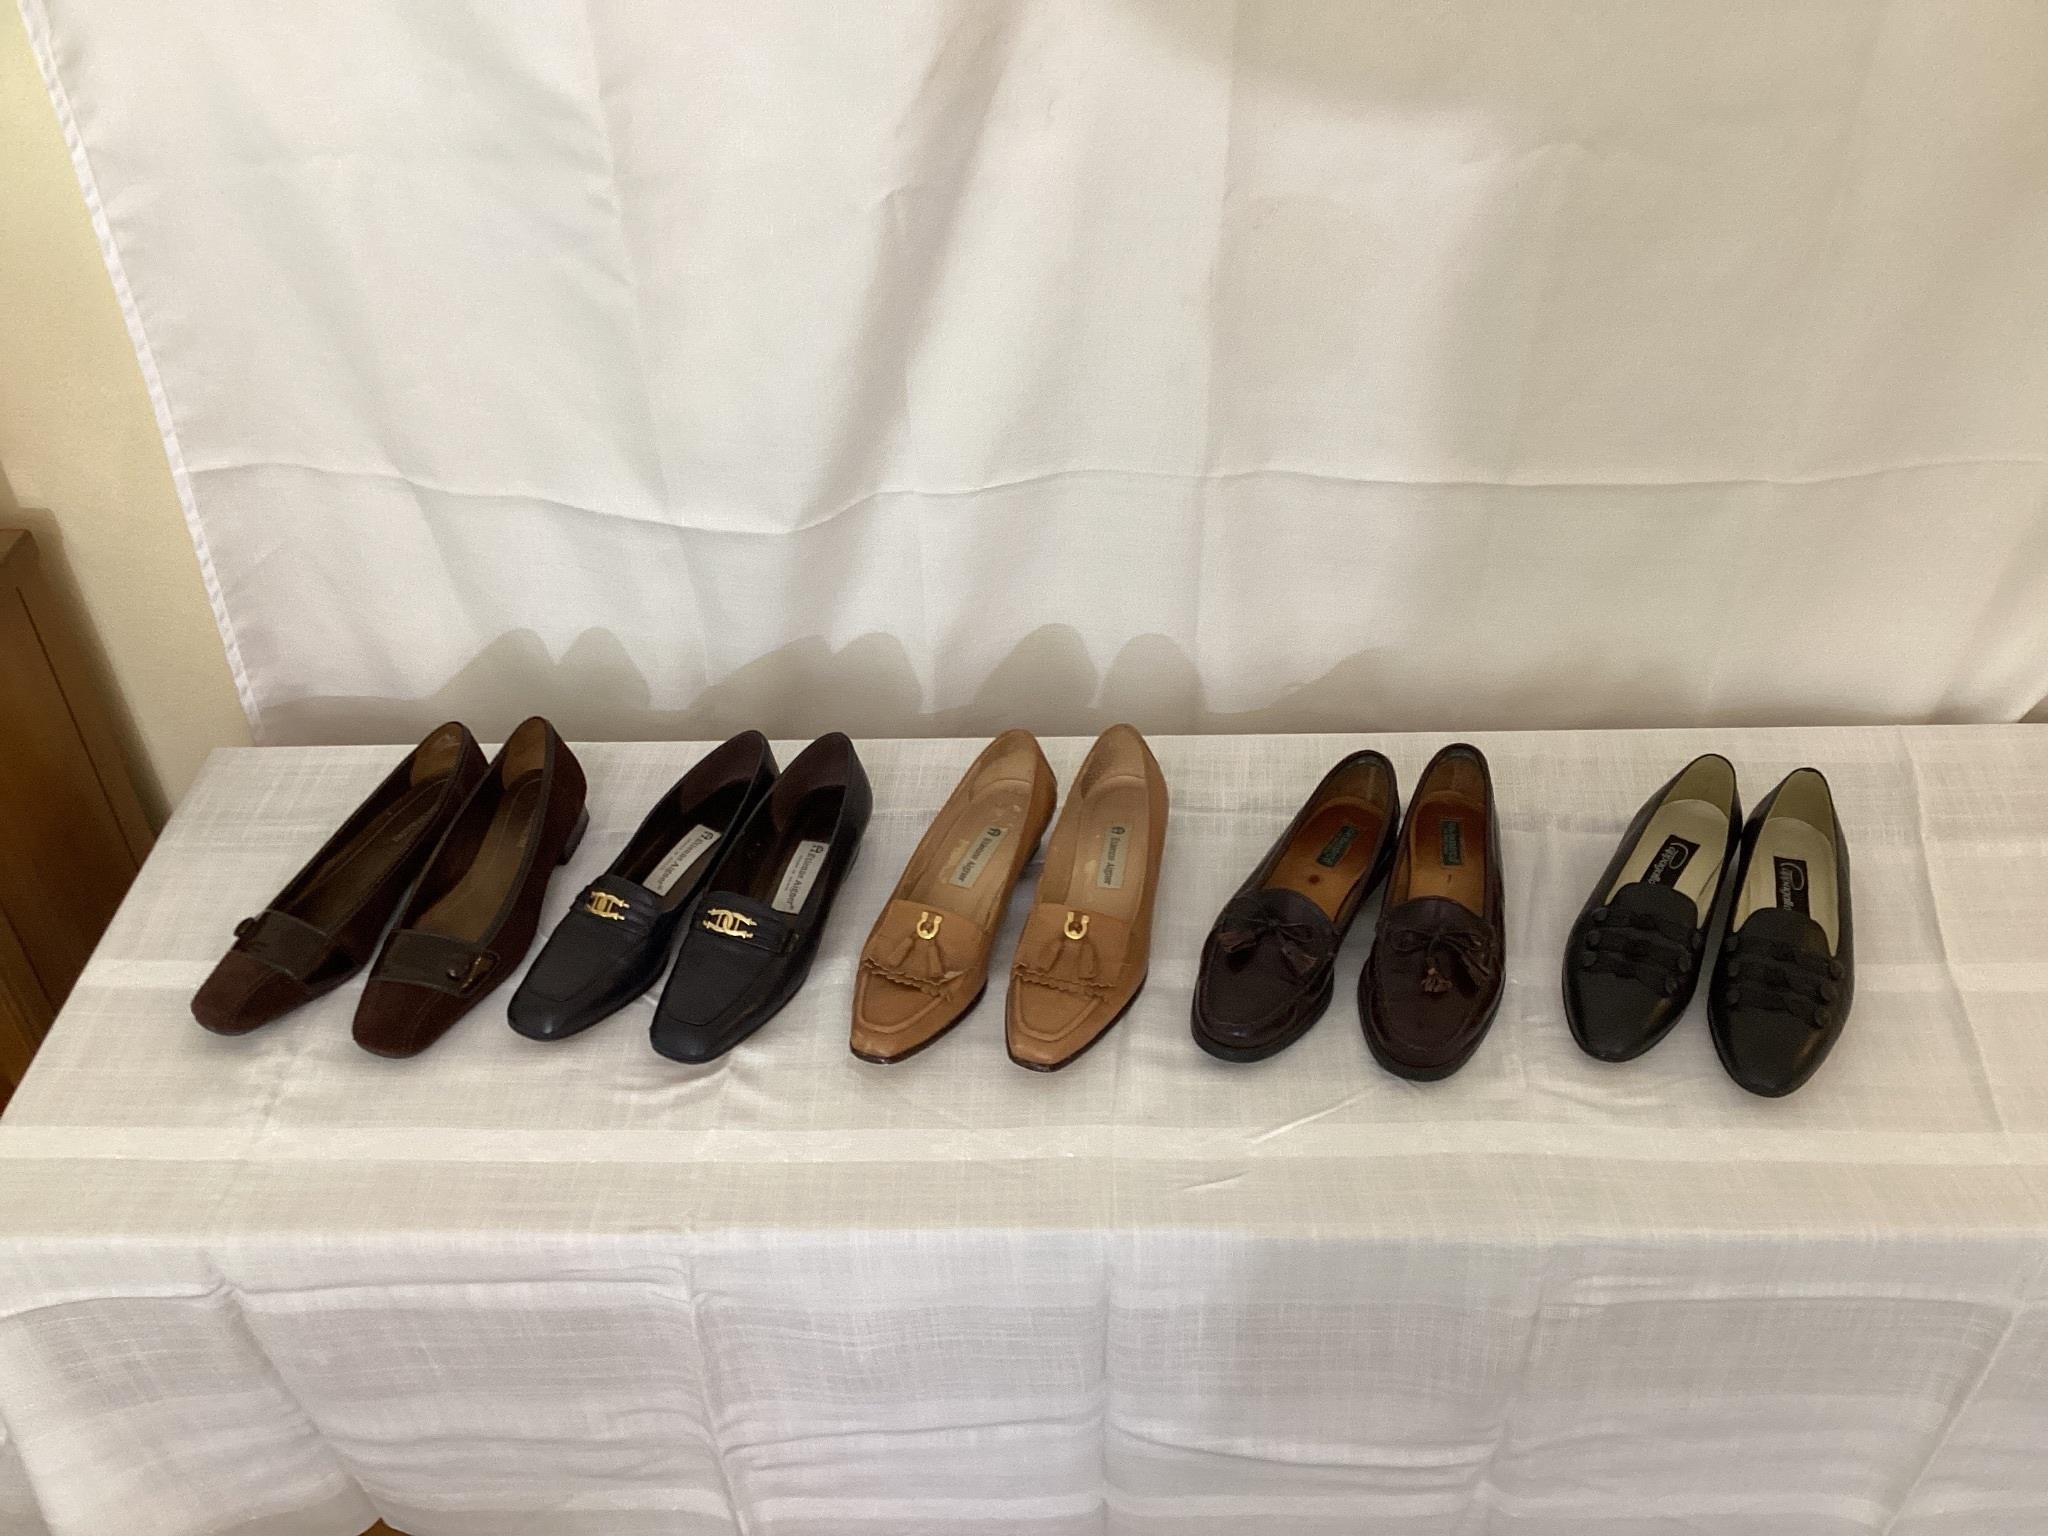 Assorted dress shoes